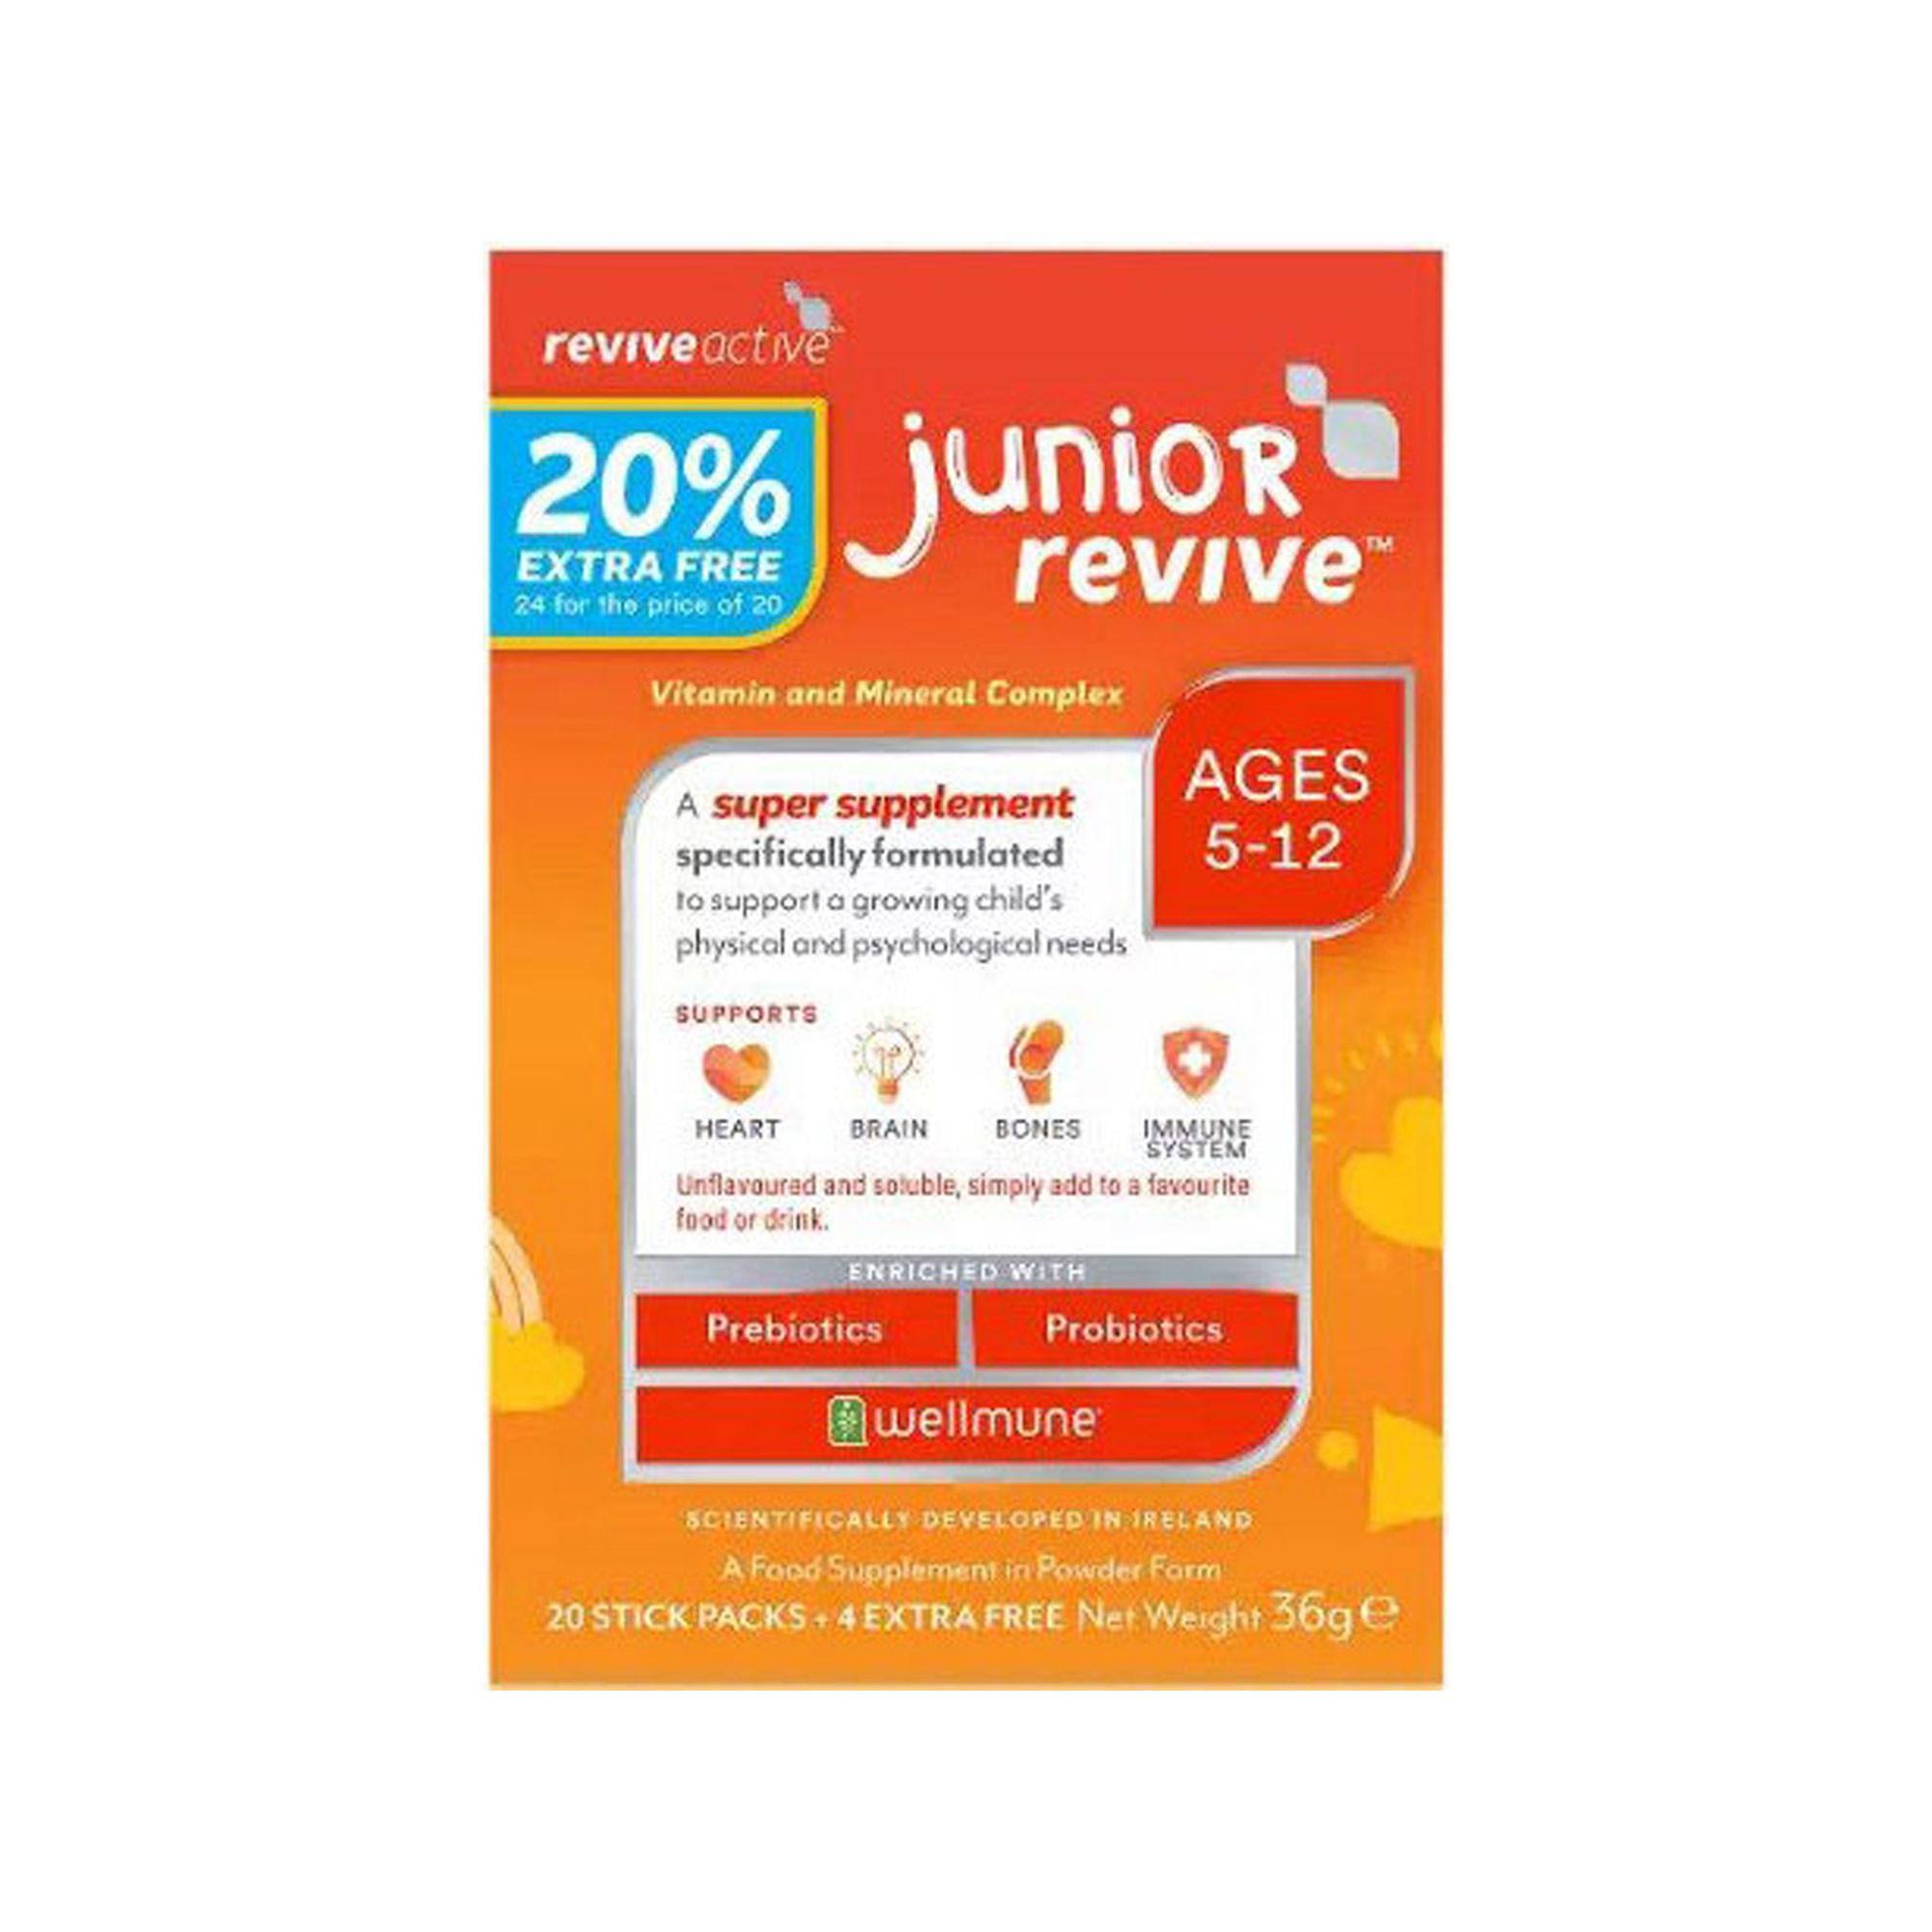 Revive Active - Junior Revive 20% EXTRA Free